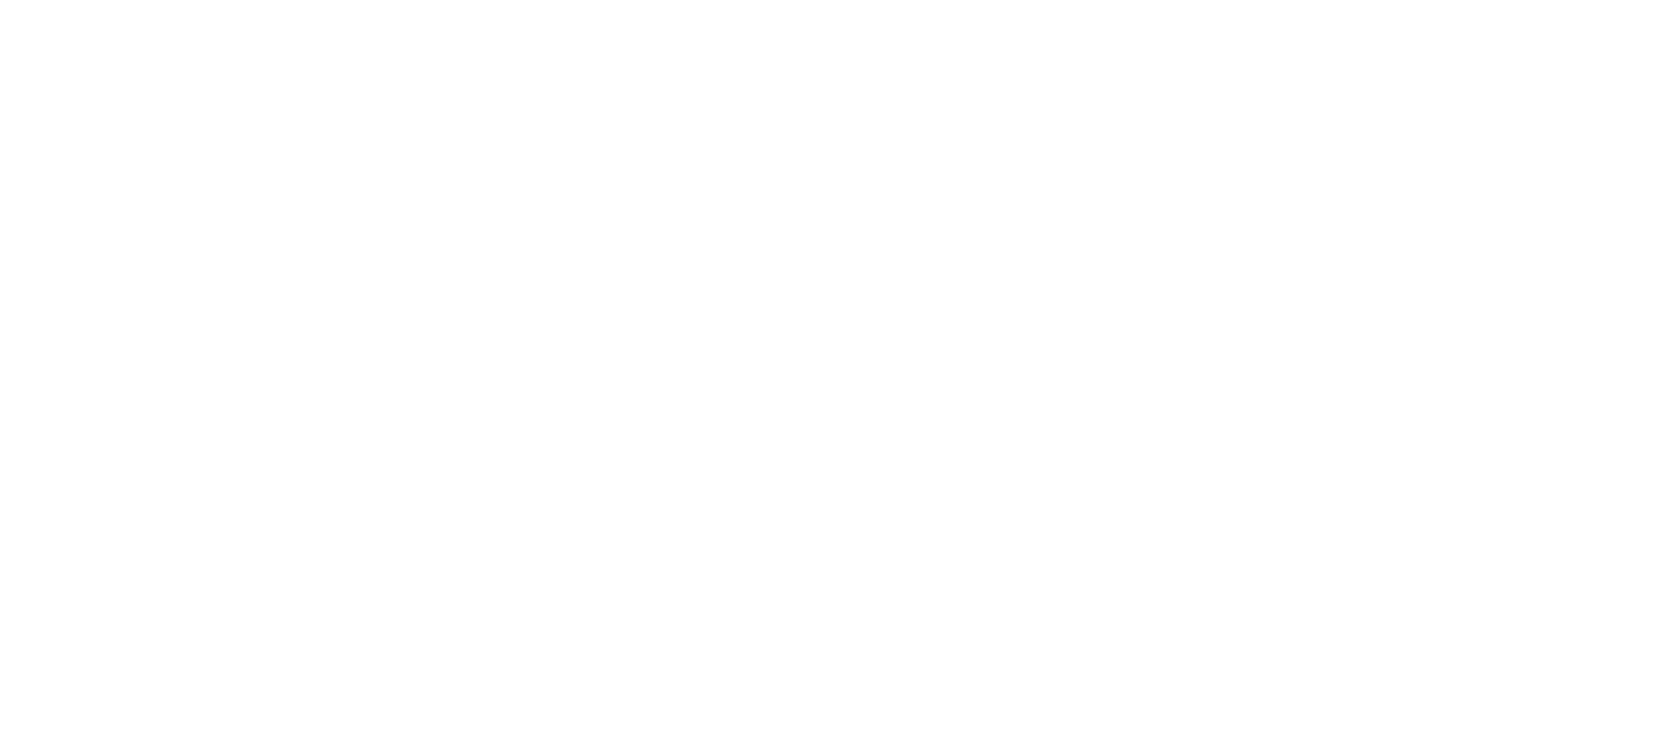 The Pearl 